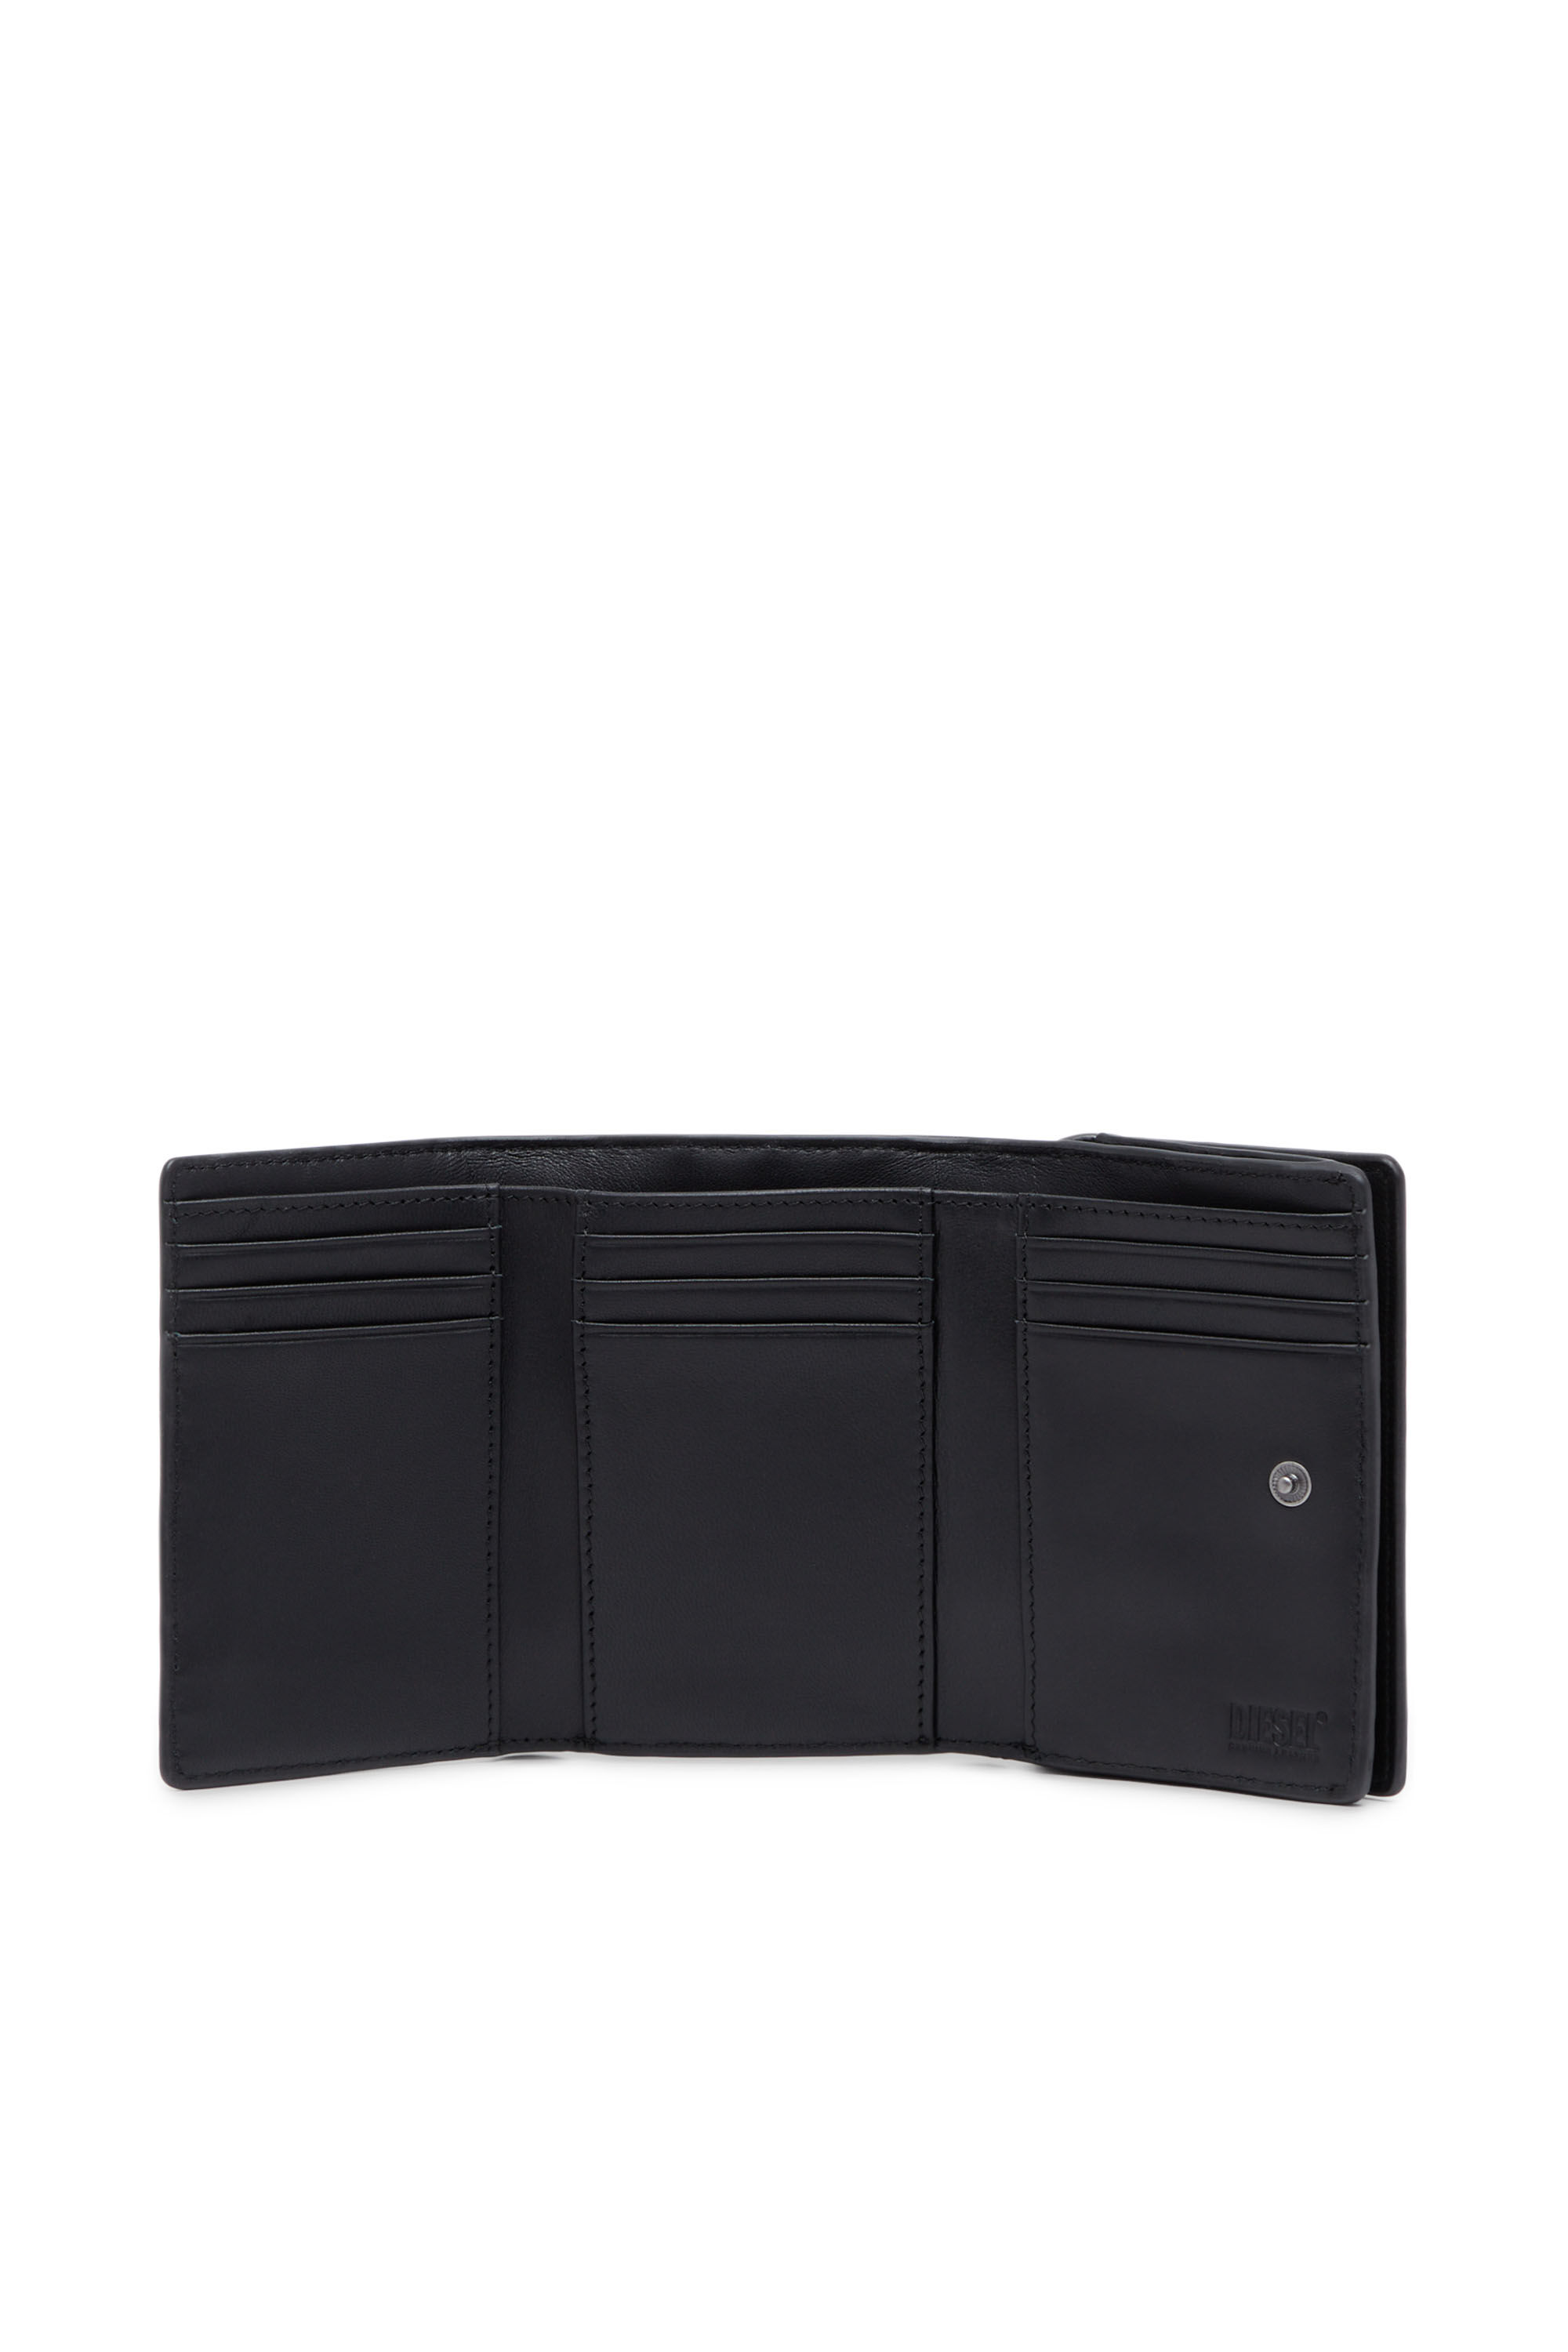 Diesel - TRI-FOLD COIN S, Man Tri-fold wallet in croc-effect leather in Black - Image 3